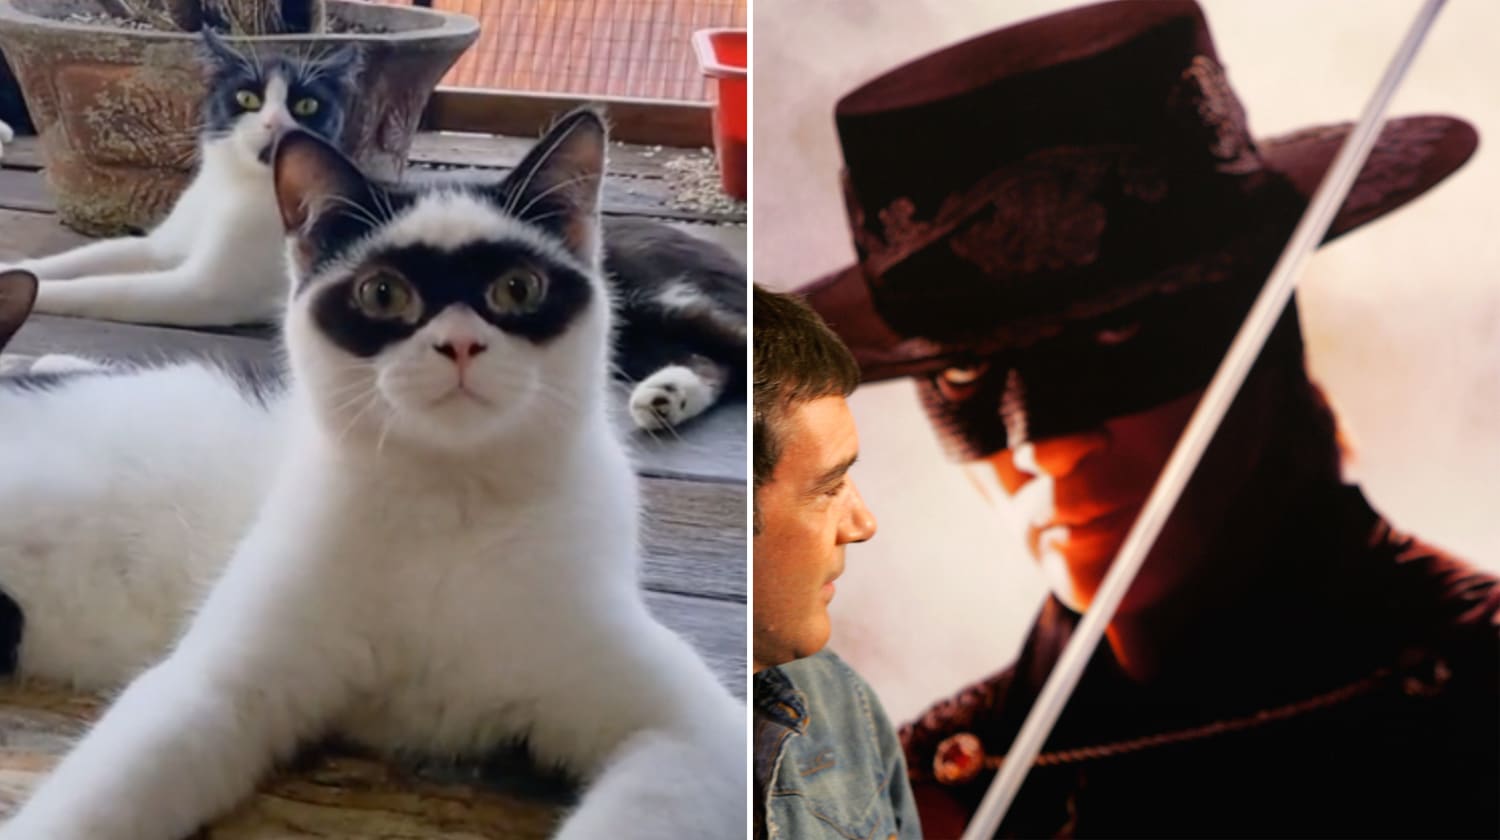 A kitten in Indonesia has gone viral on TikTok for its black markings that make it look like the masked vigilante Zorro.